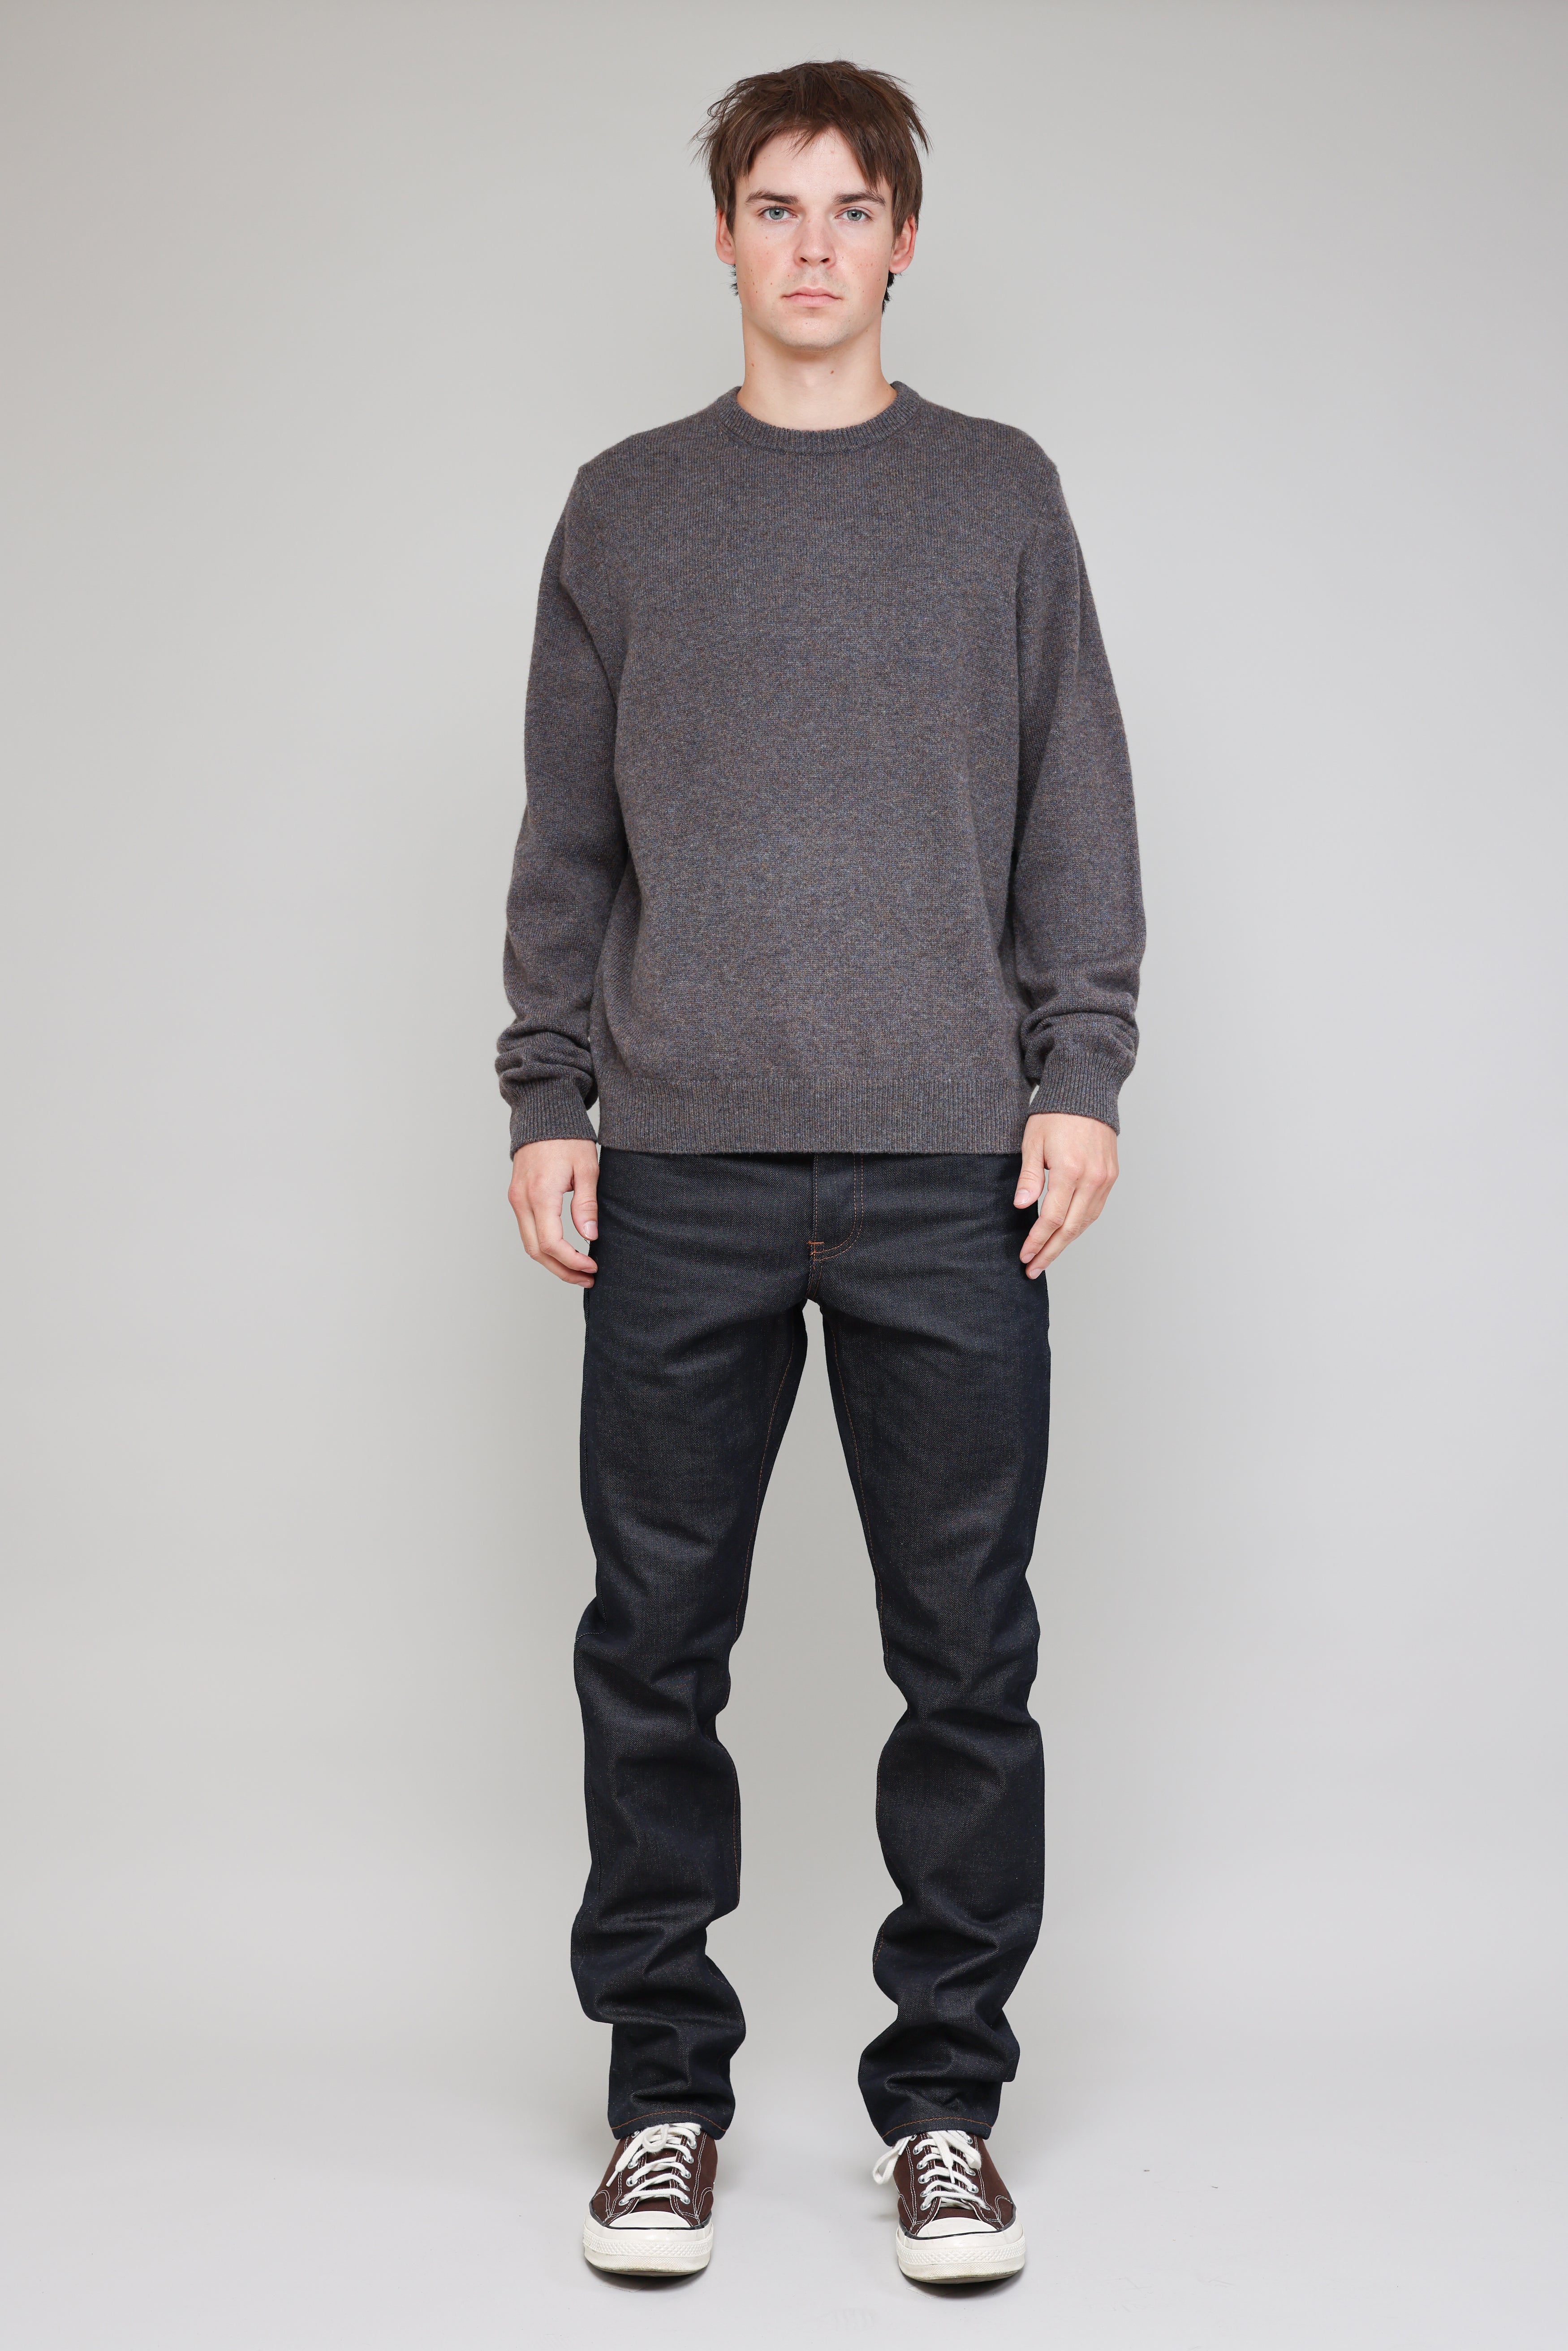 NS3018-20 New Wool Crew Neck in Melange Fossil 4